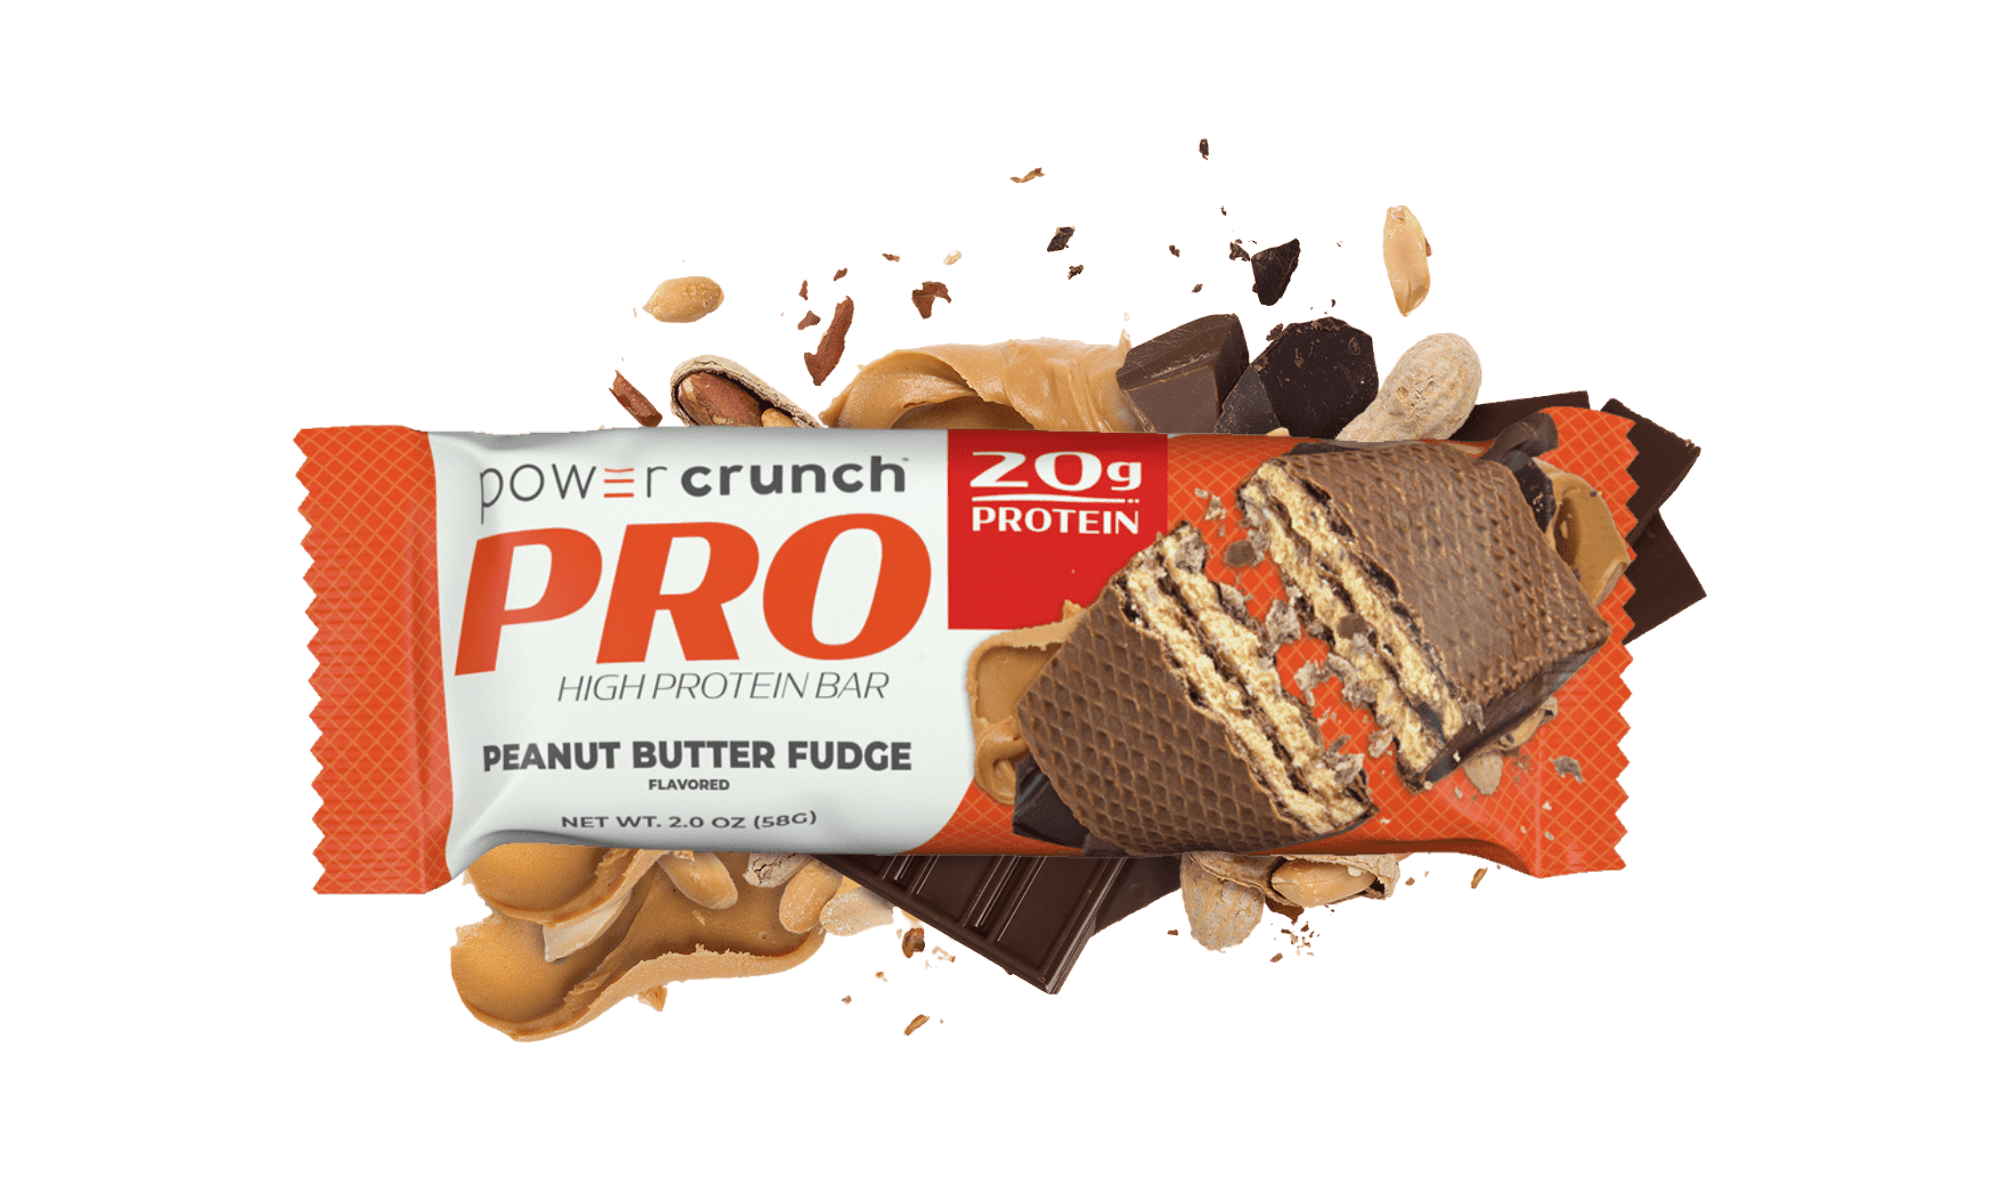 Power Crunch PRO Peanut Butter Fudge 20g protein bars pictured with Peanut Butter Fudge flavor explosion